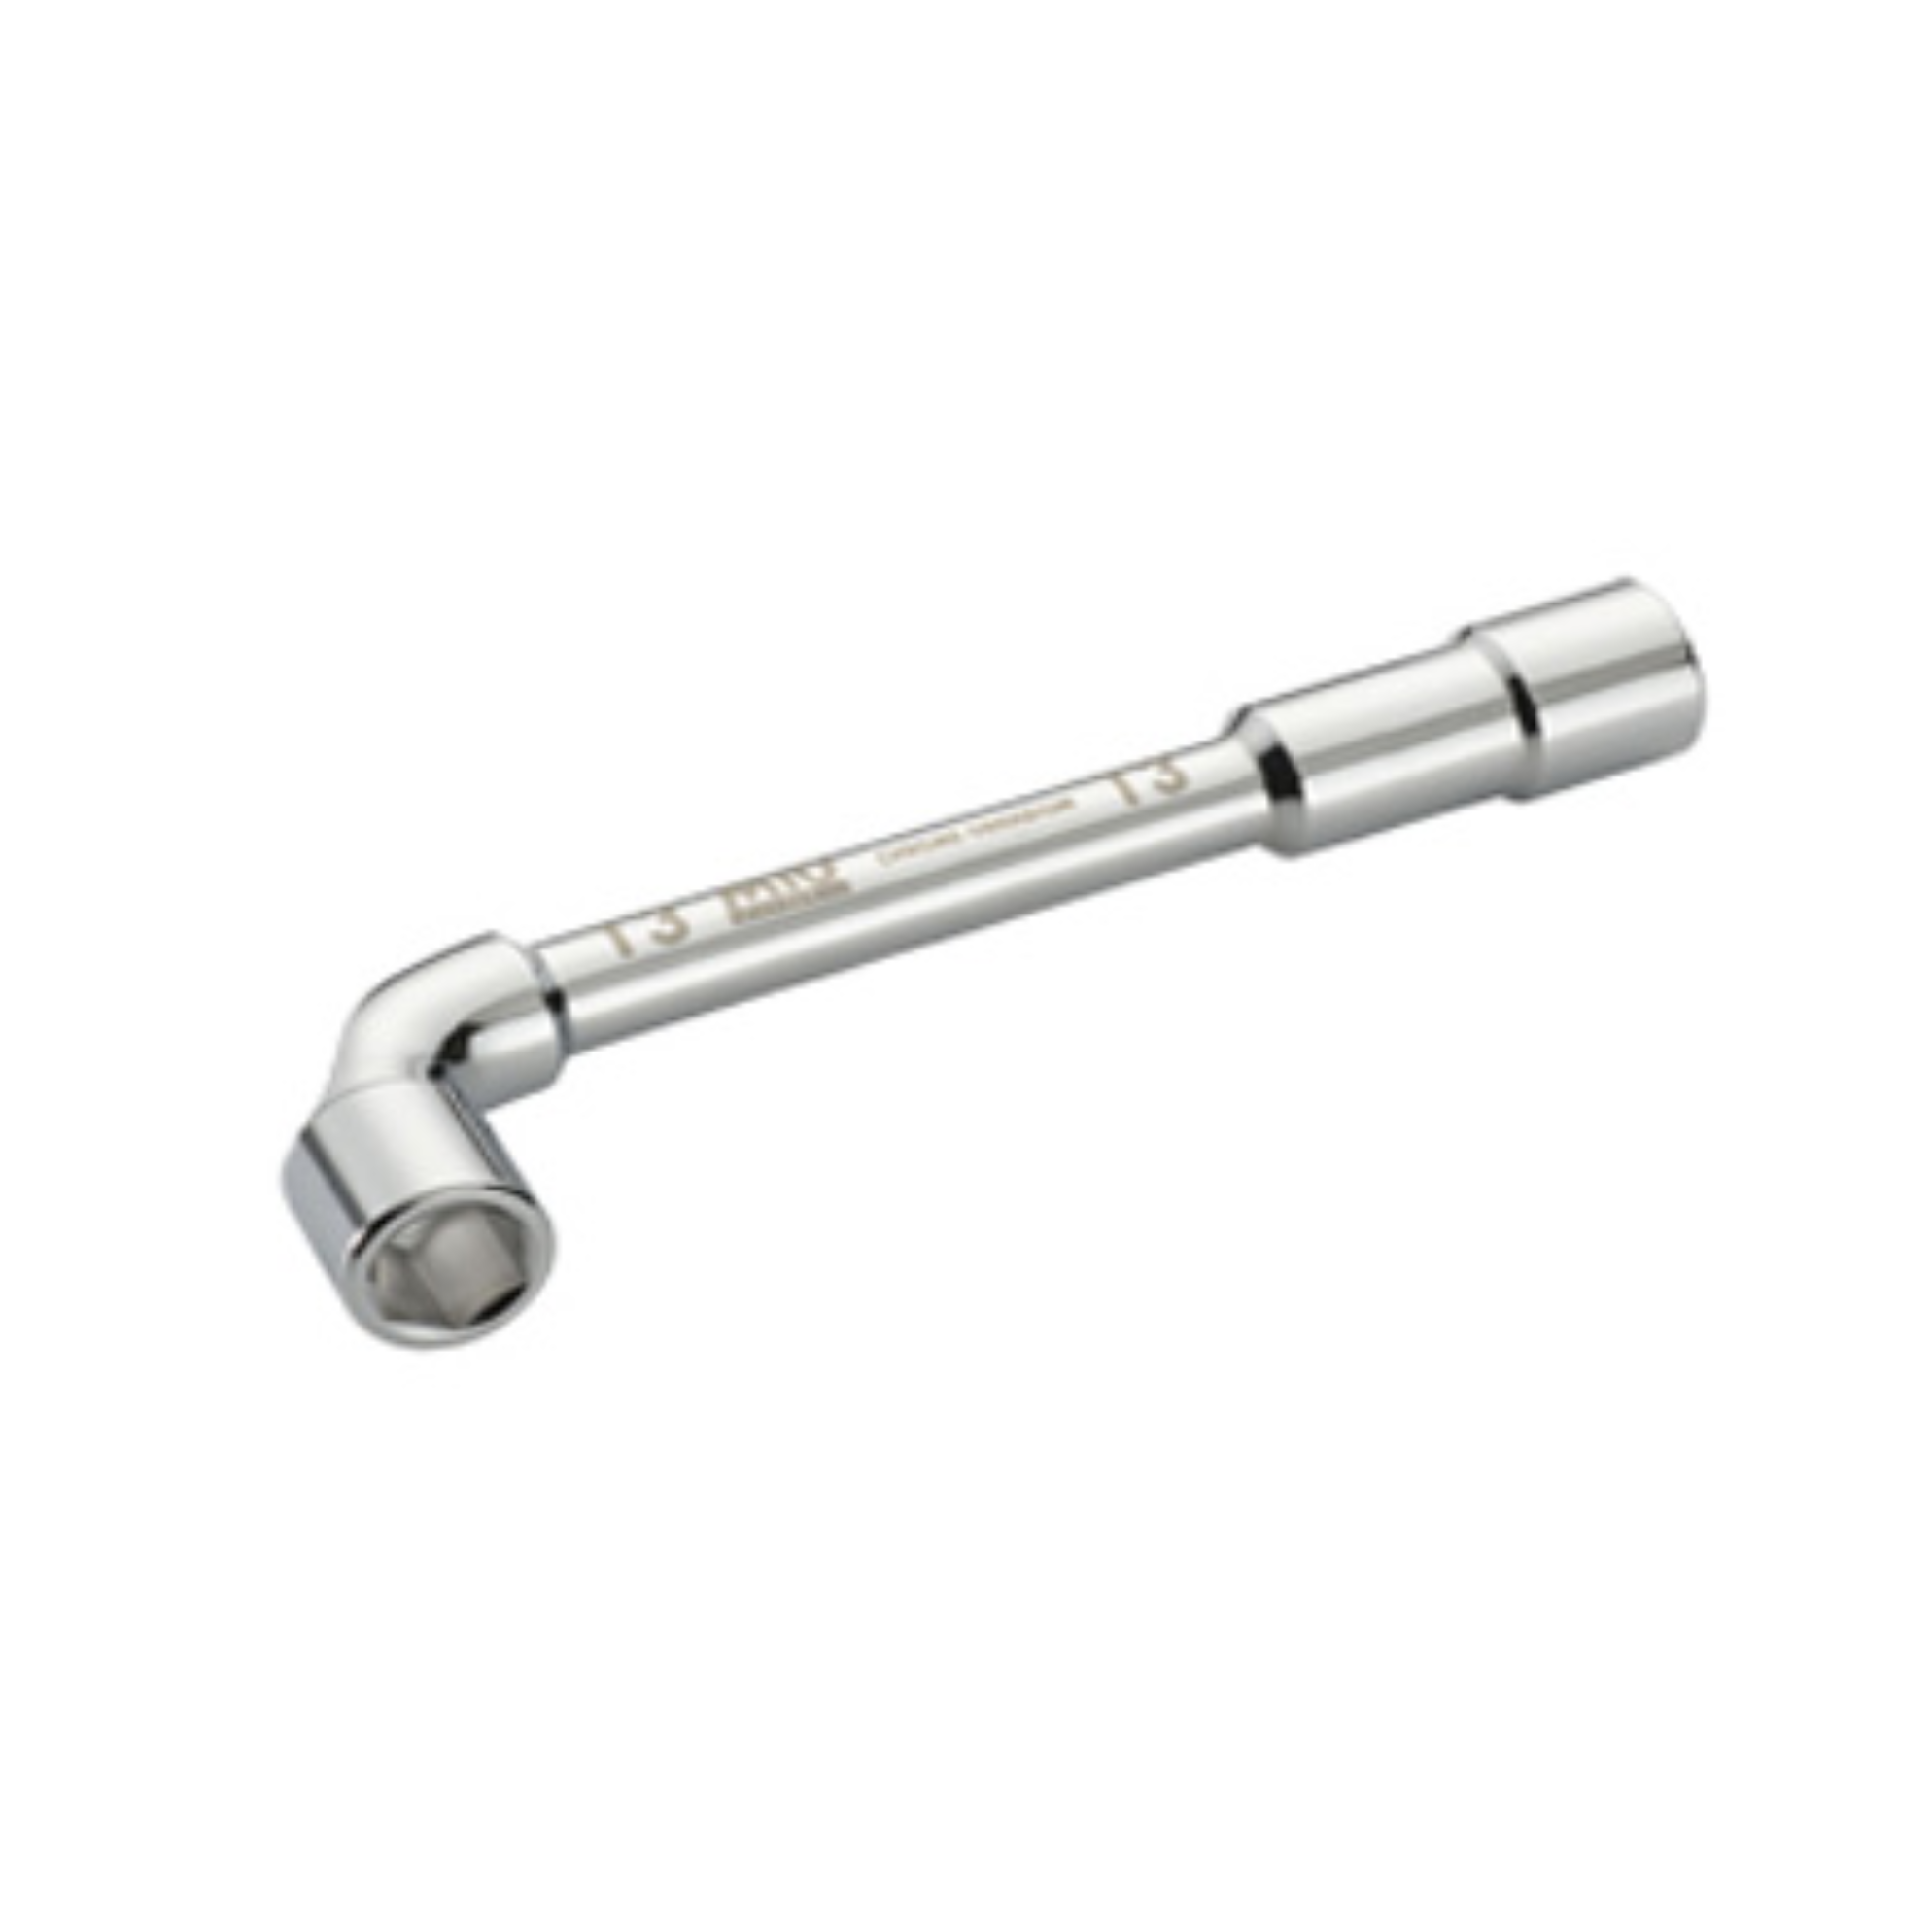 M10 L-Wrench ANGLE PIPE WRENCH